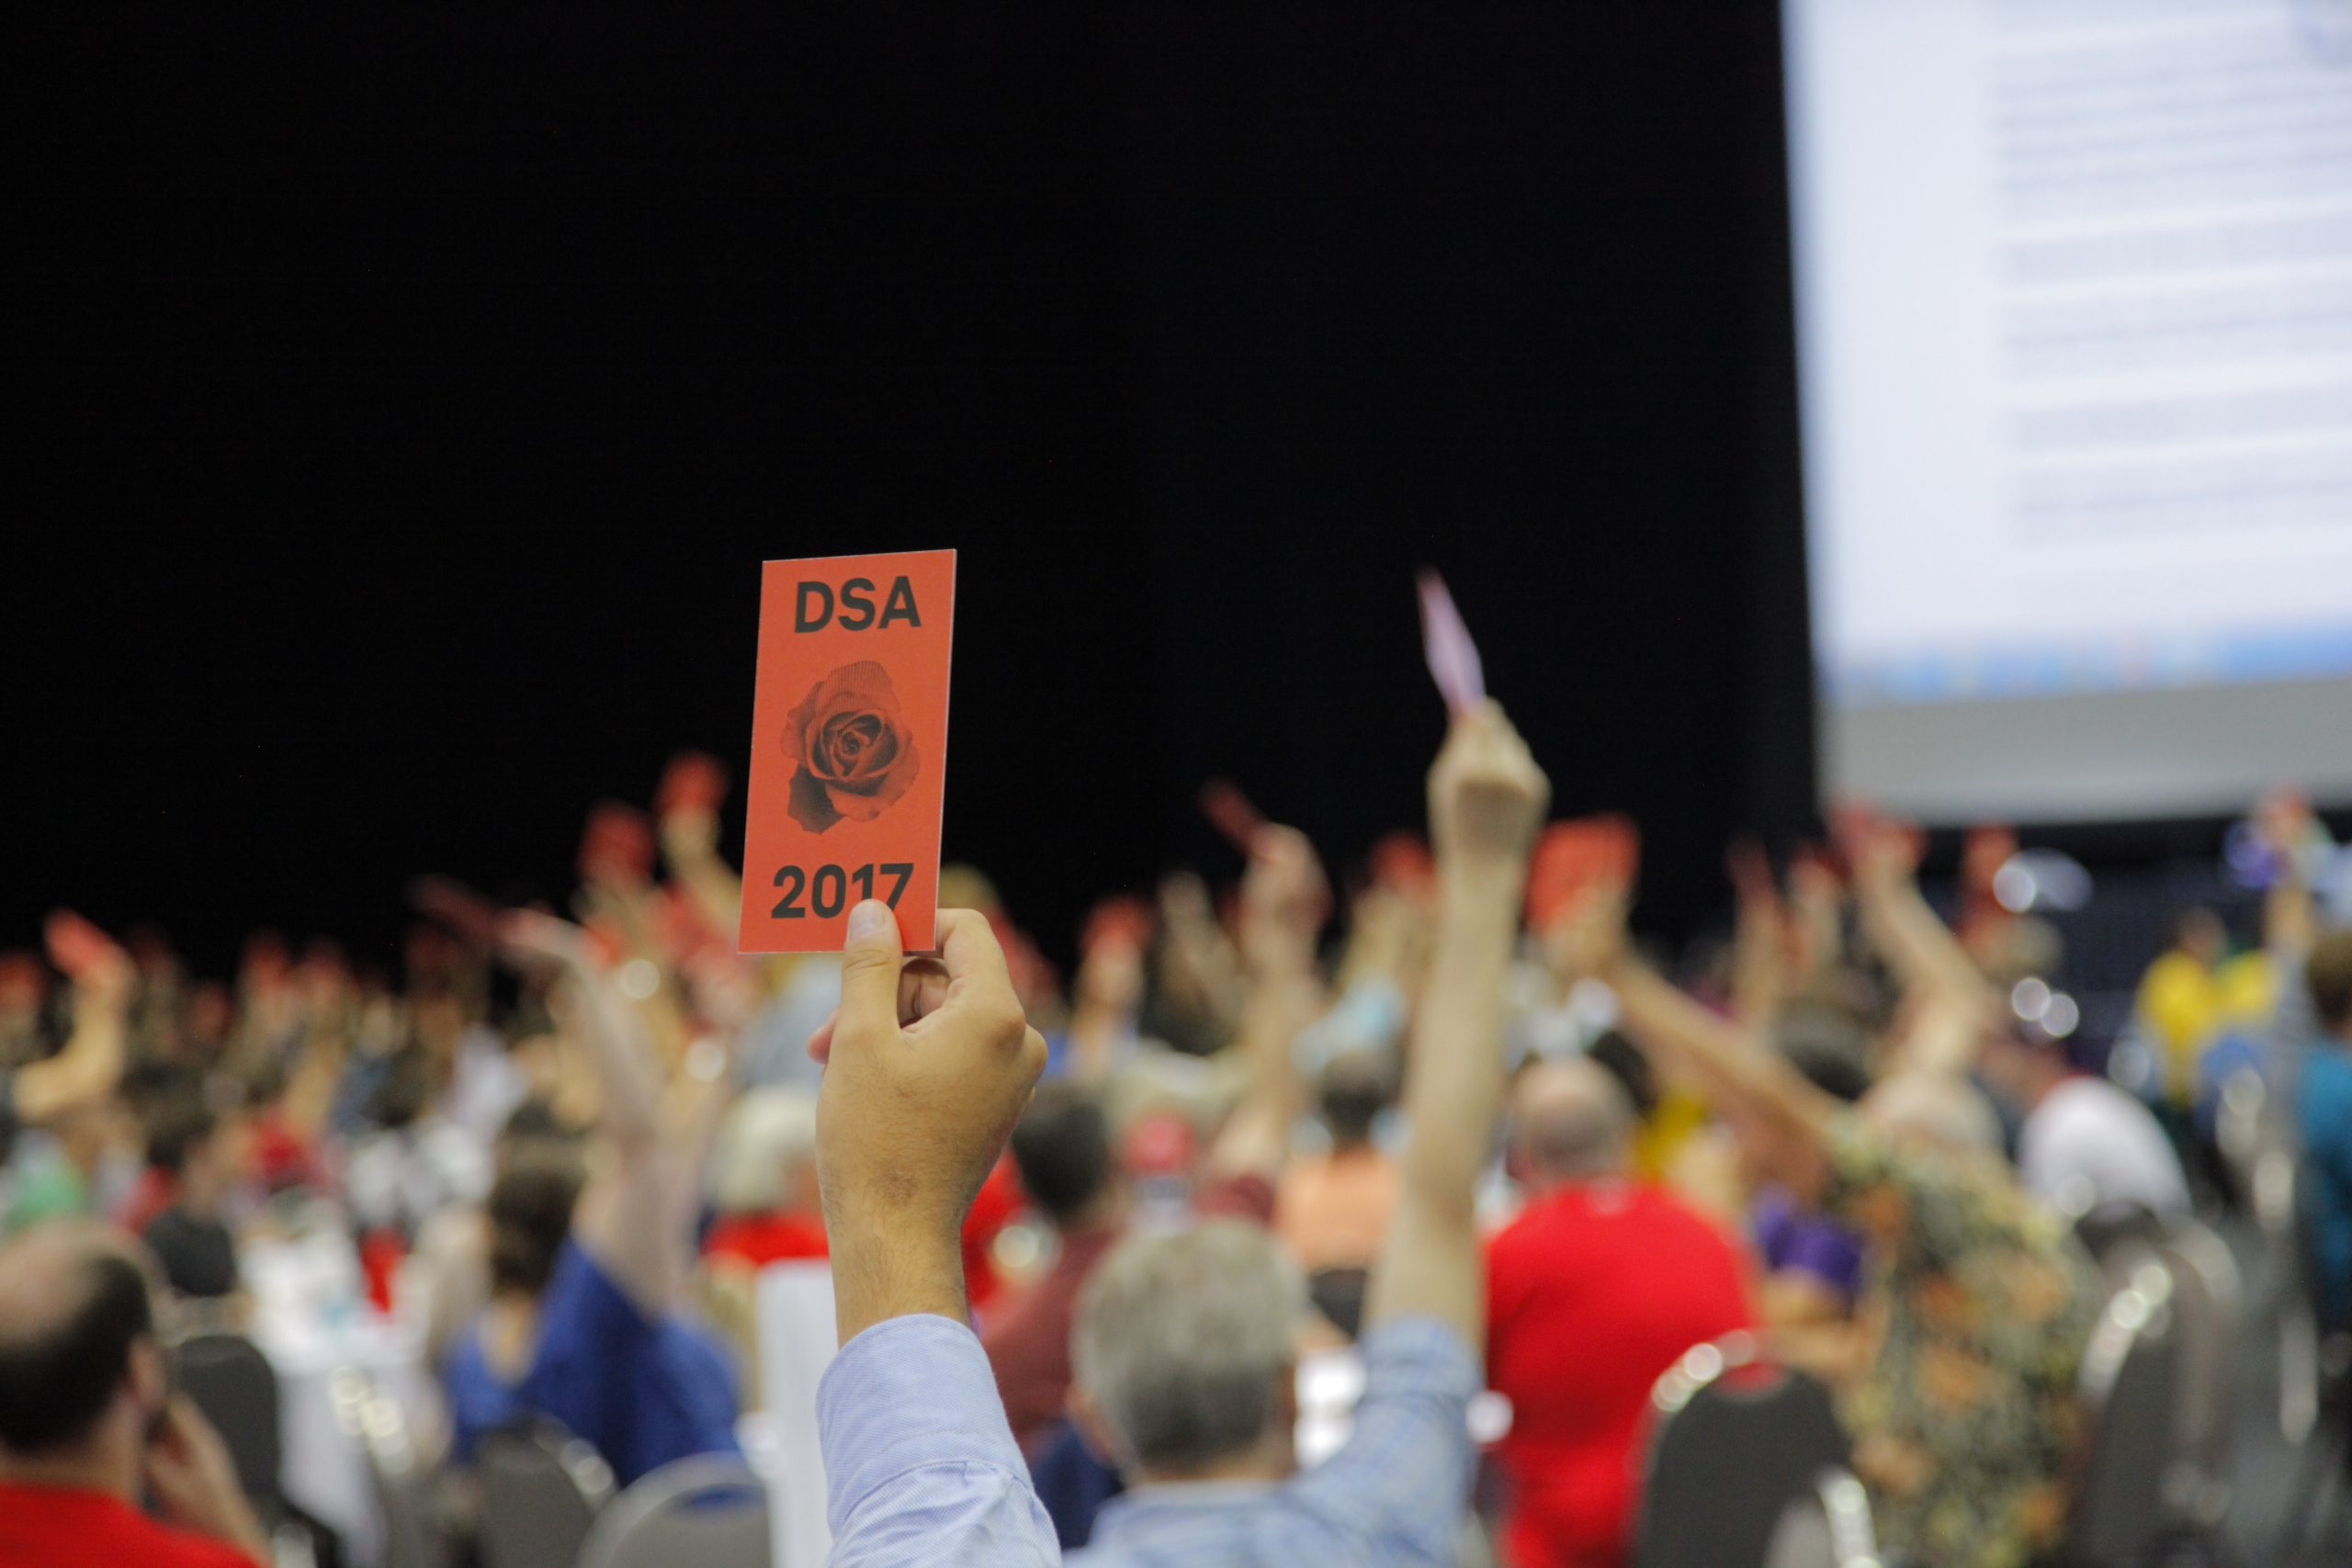 Why Single Transferable Vote is Wrong for Internal DSA Elections